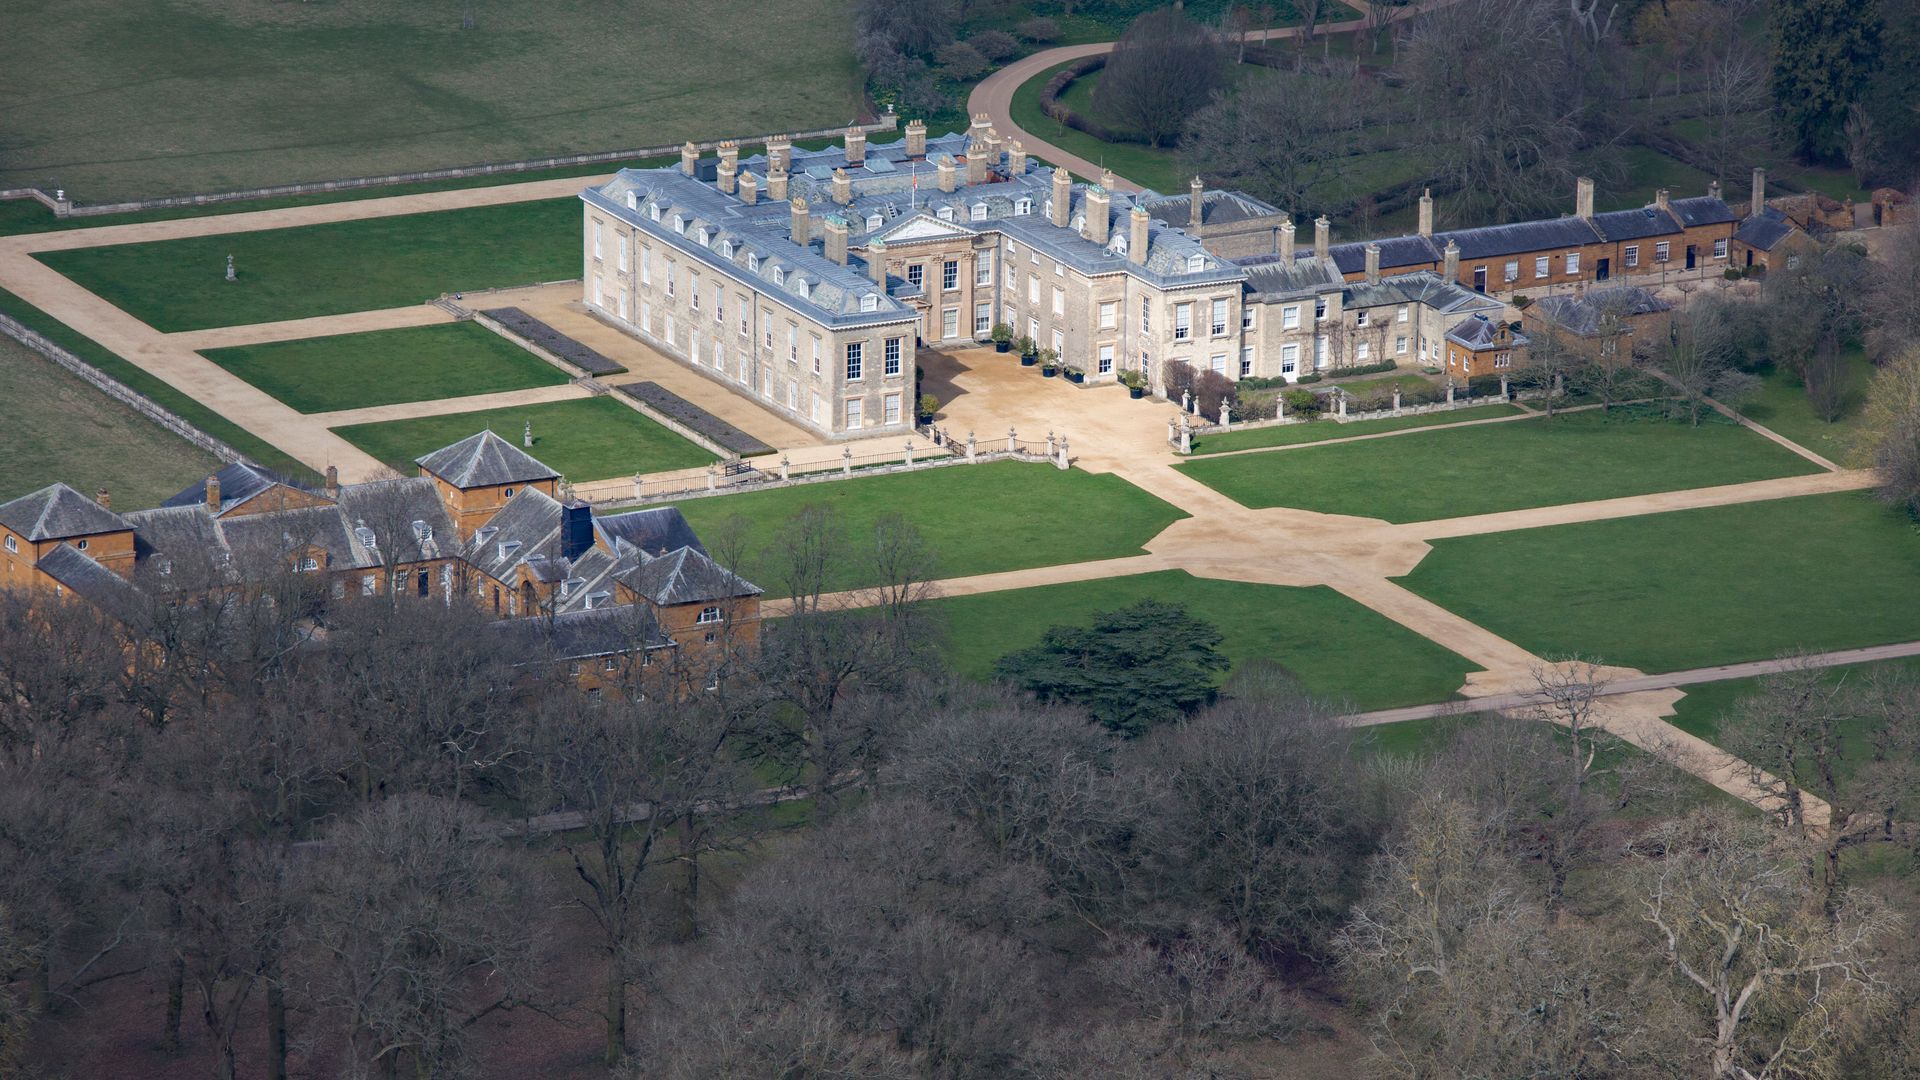 Aerial view of Althorp, this grade 1 listed stately home was the home of Lady Diana Spencer who later became the Princess of Wales, it is located on the Harlestone Road between the villages of Great Brington and Harlestone, 5 miles north west of Northampton. 